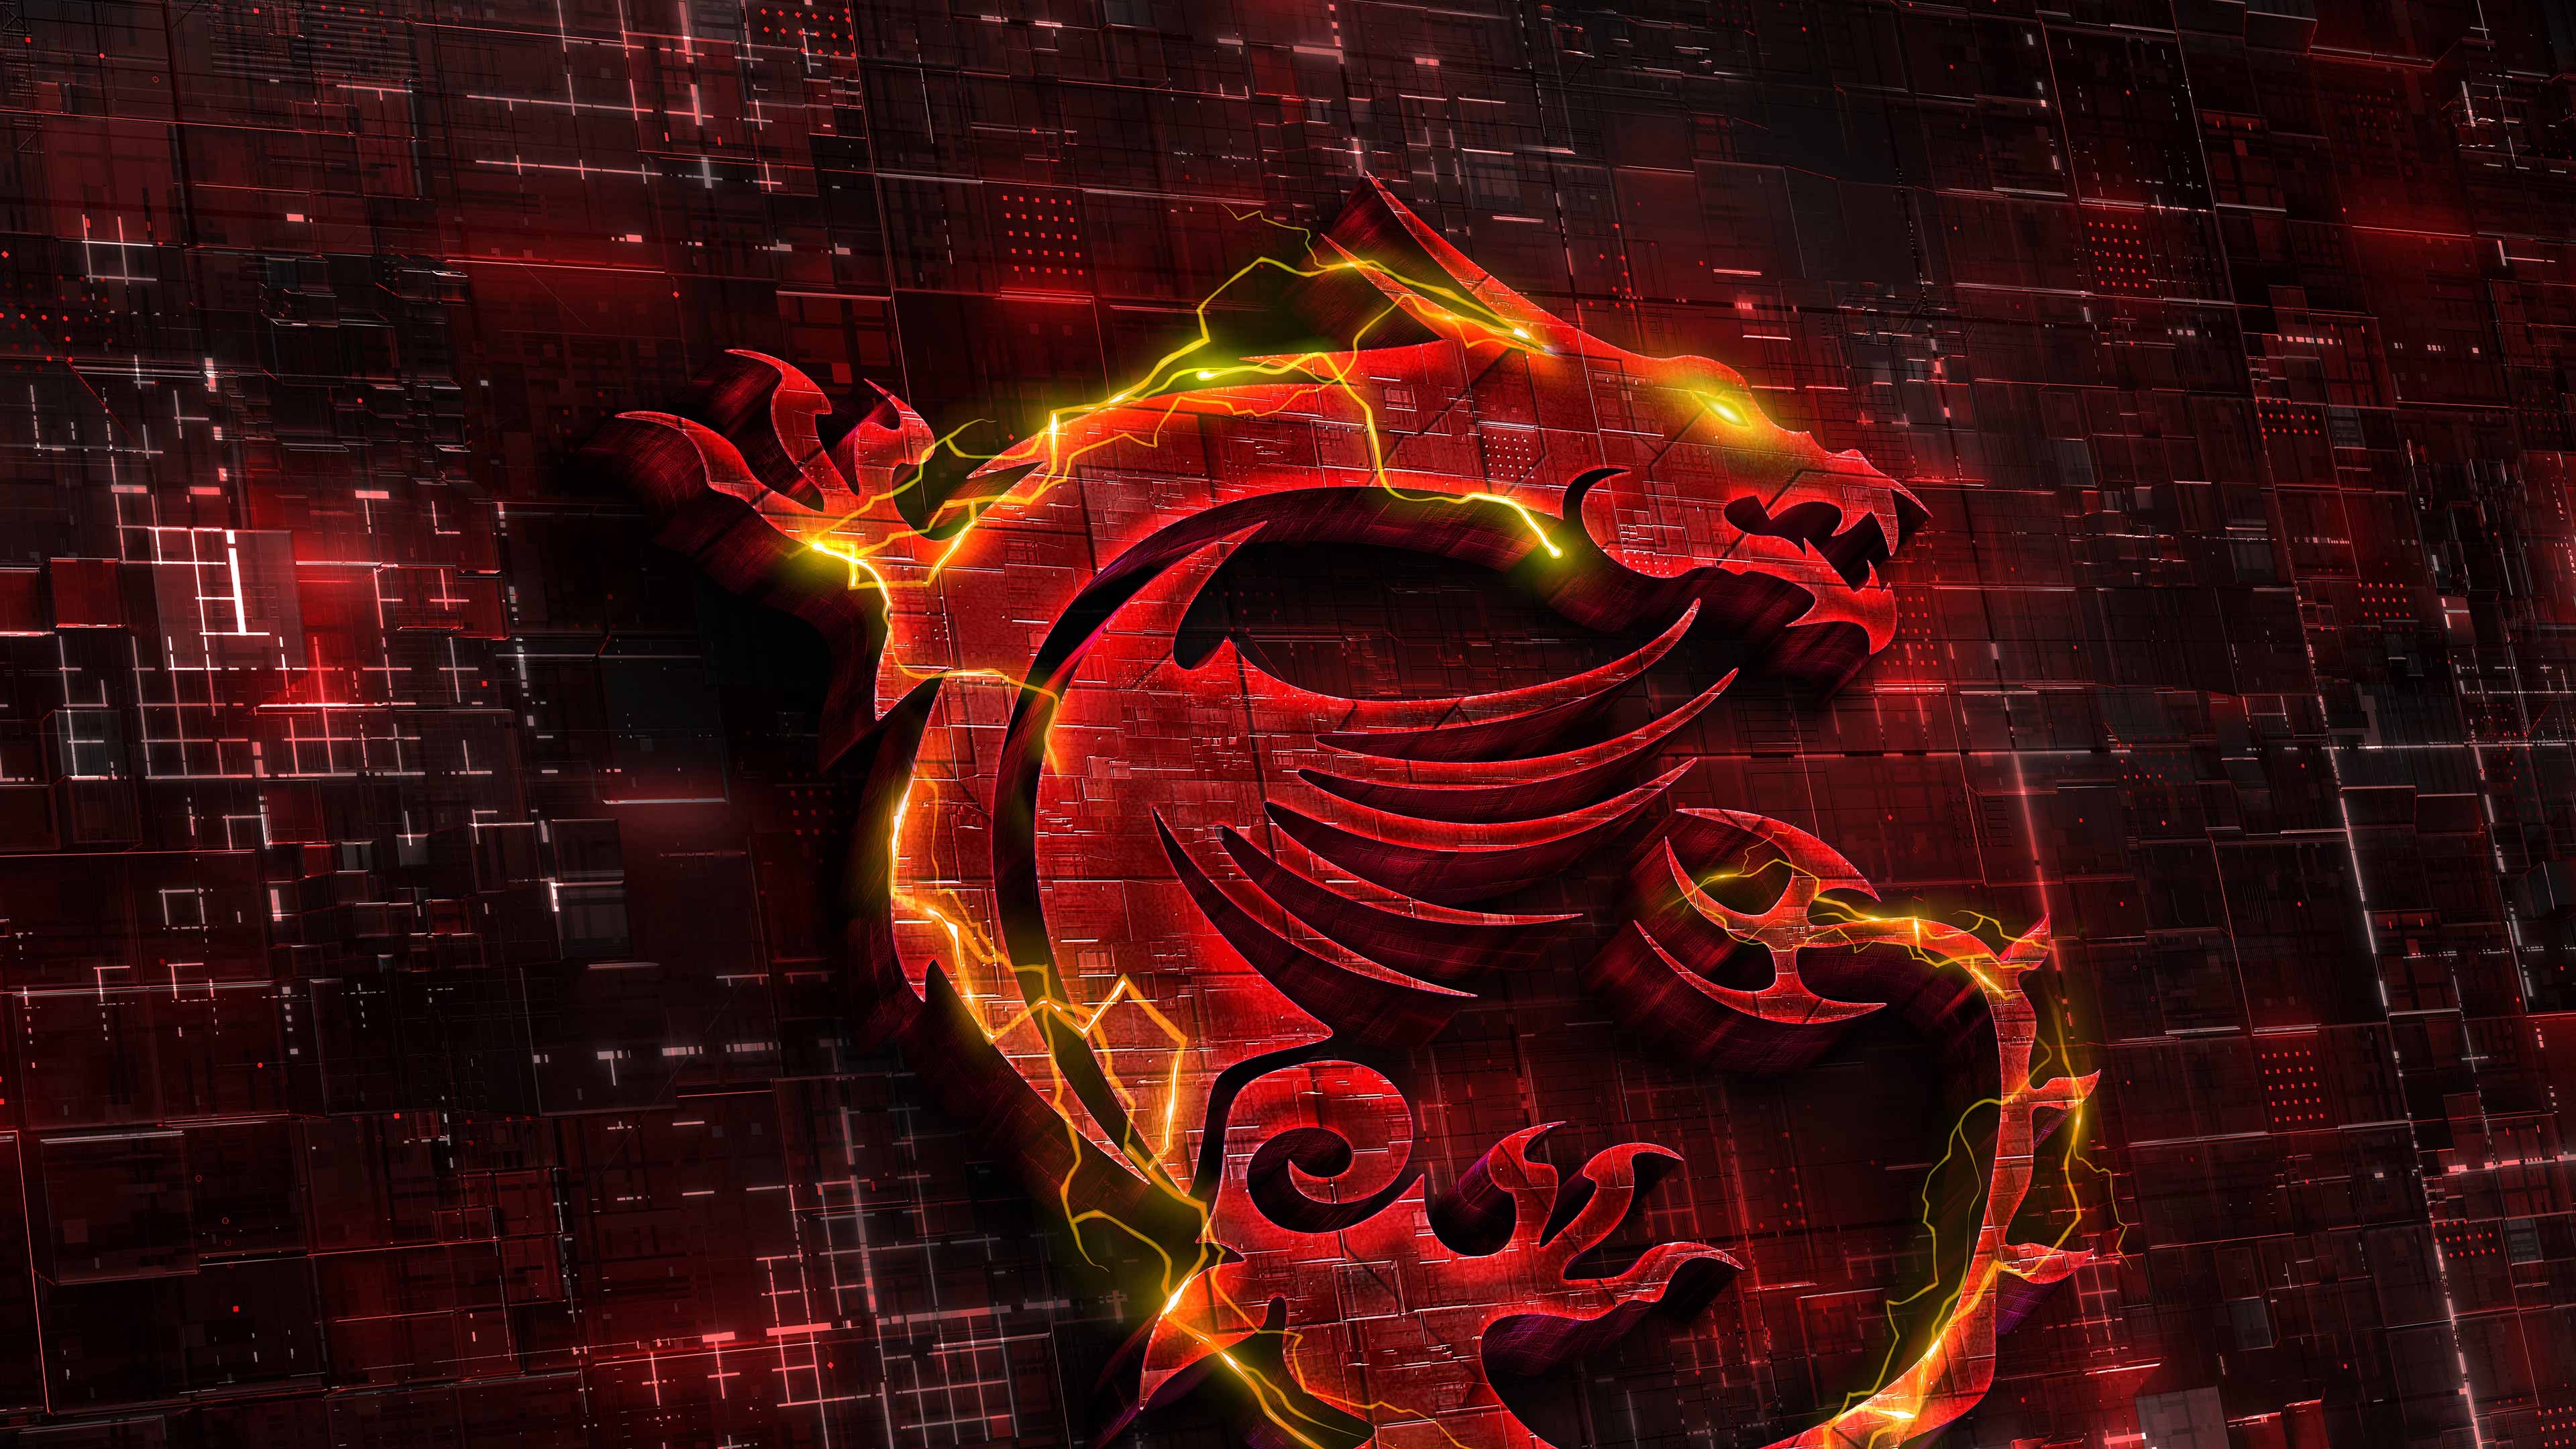 HD wallpaper, Grid, 3D Background, Dragon, Red Background, Msi Gaming, Fire